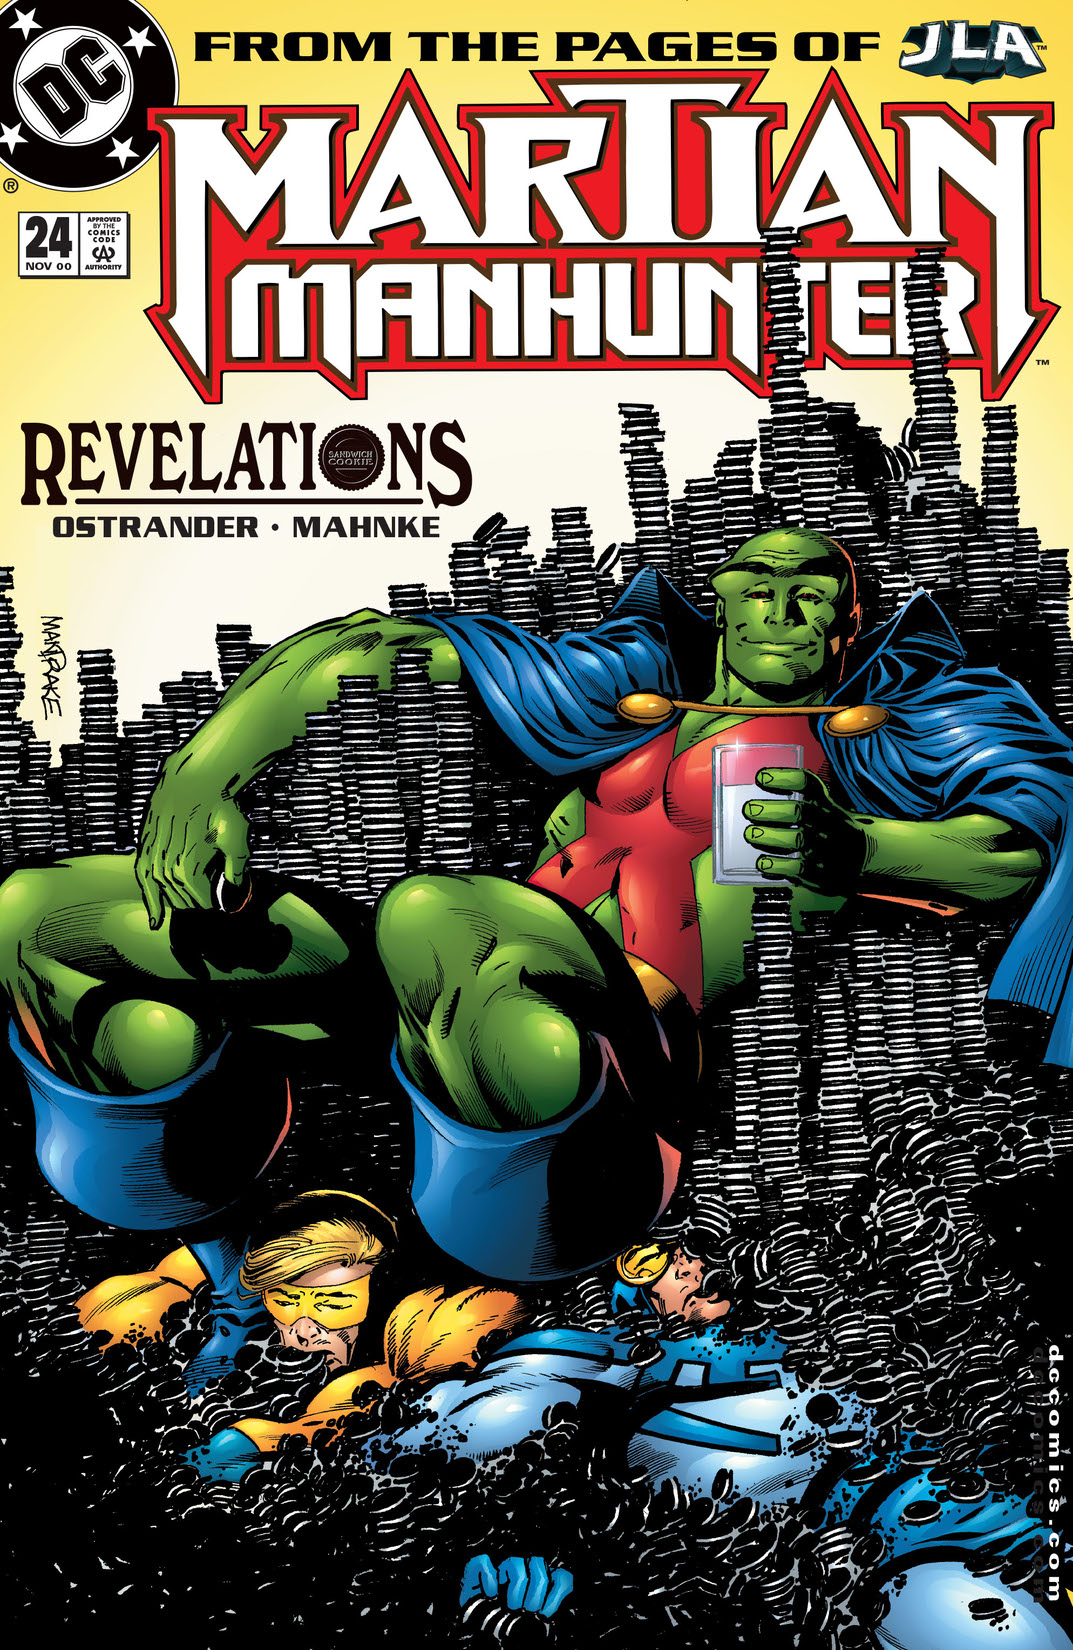 Martian Manhunter (1998-) #24 preview images